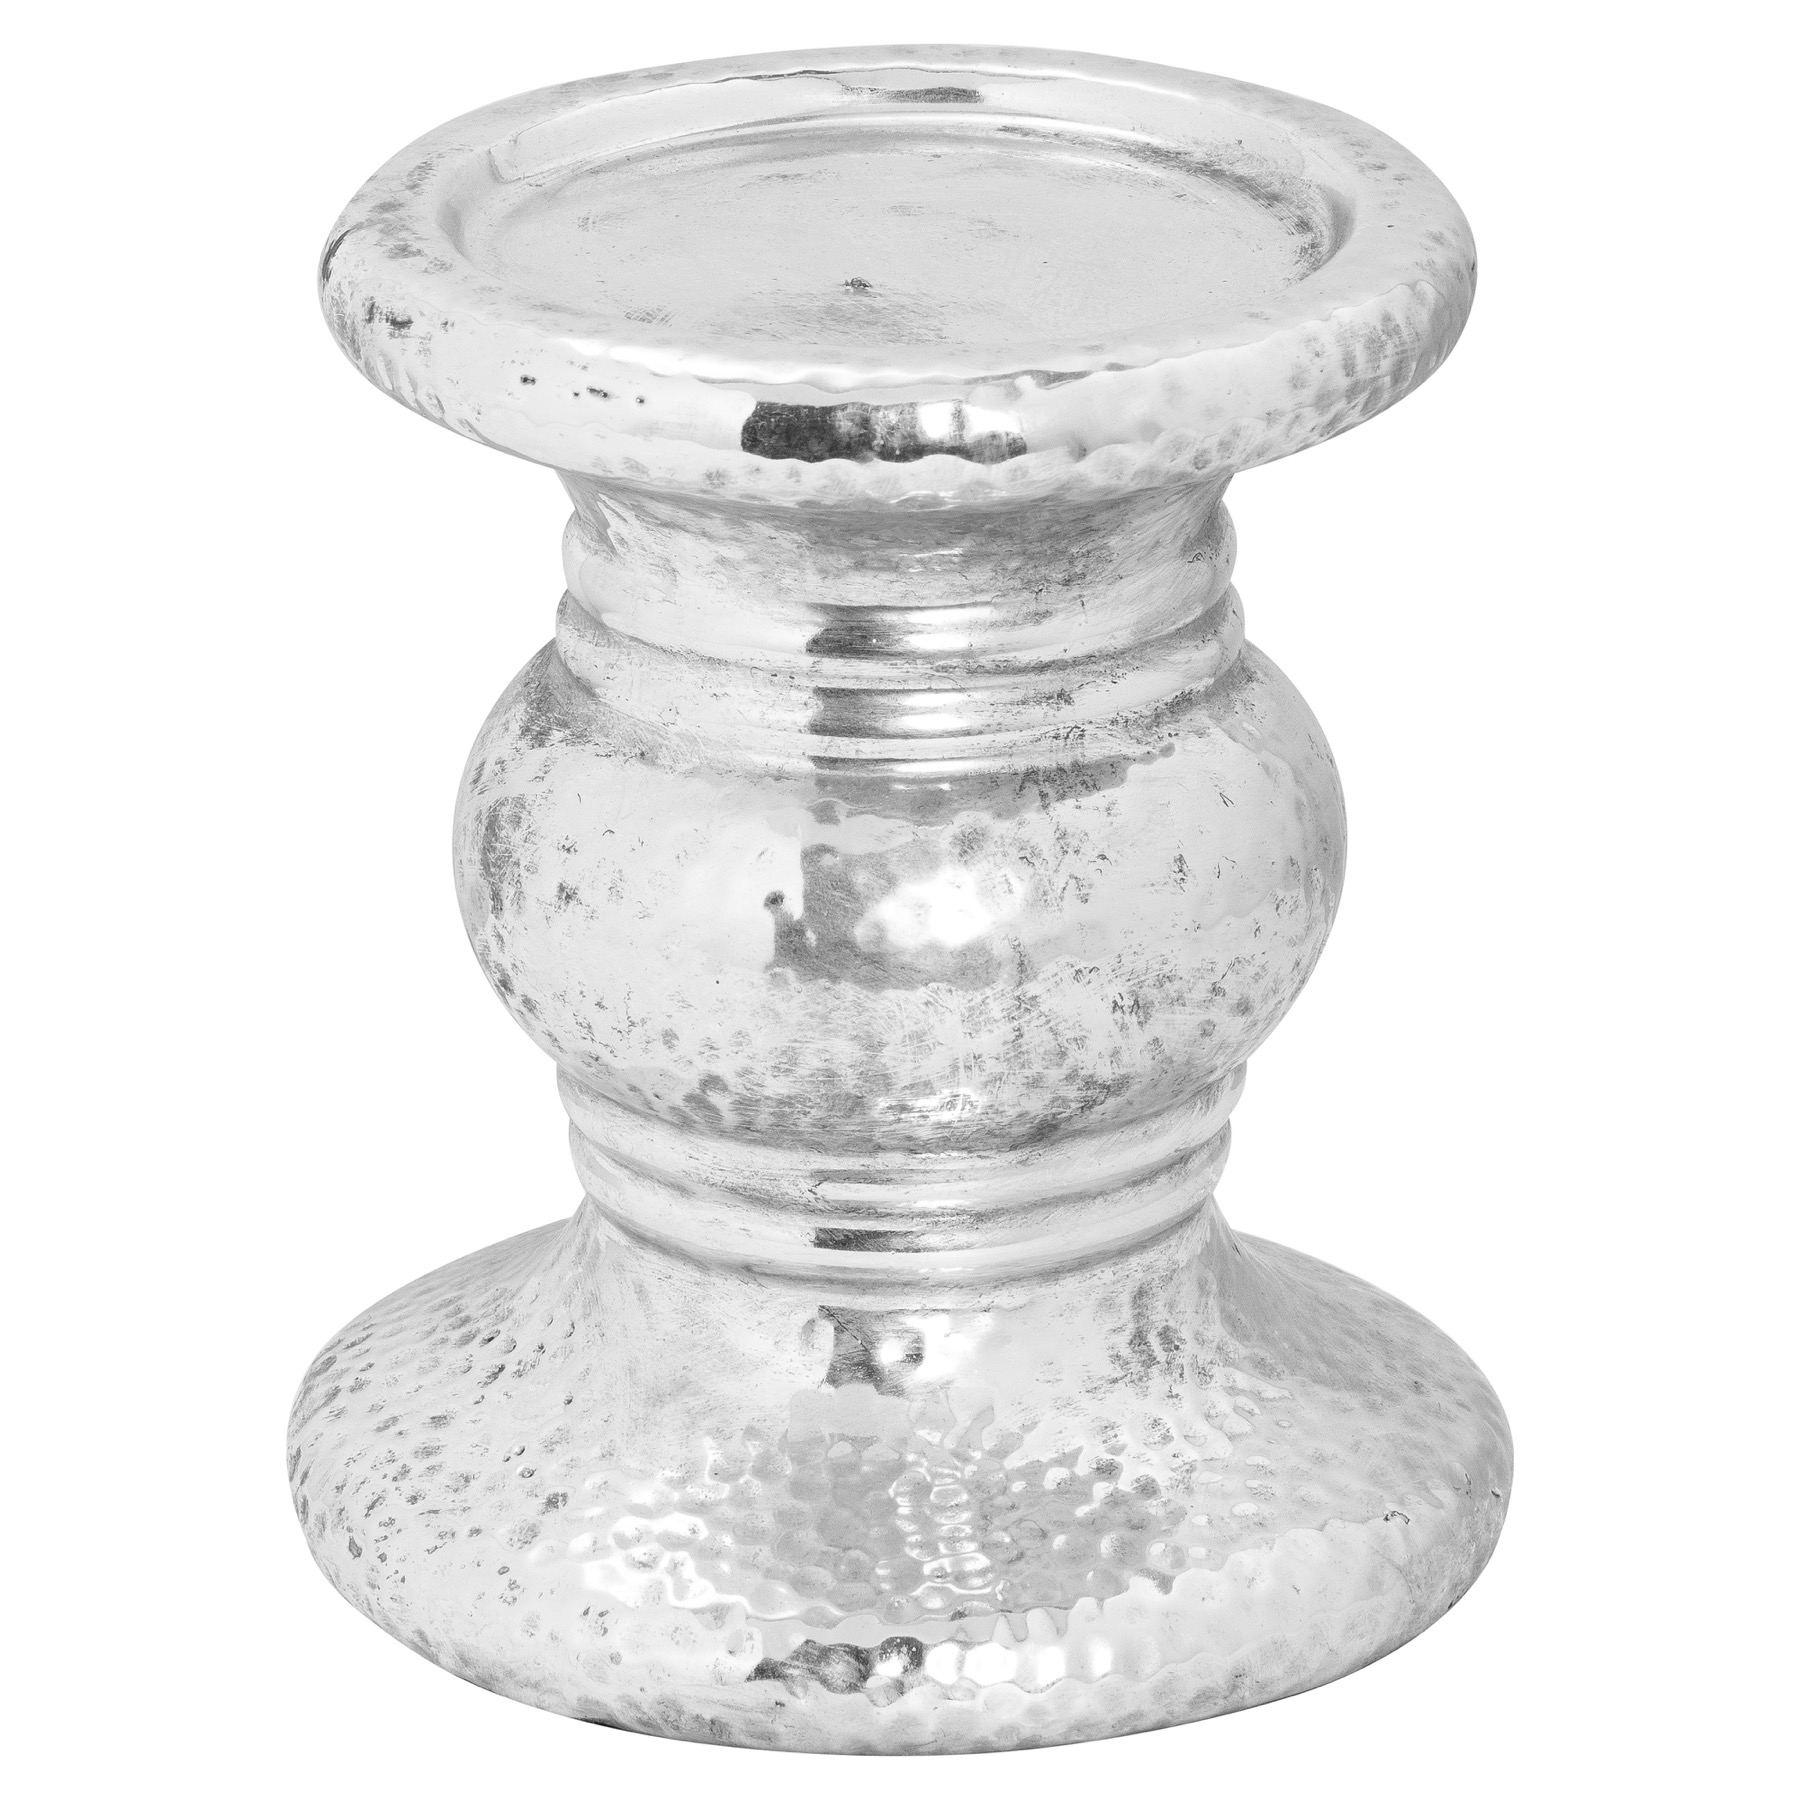 Silver Punch Faced Ceramic Candle Holder - Image 1